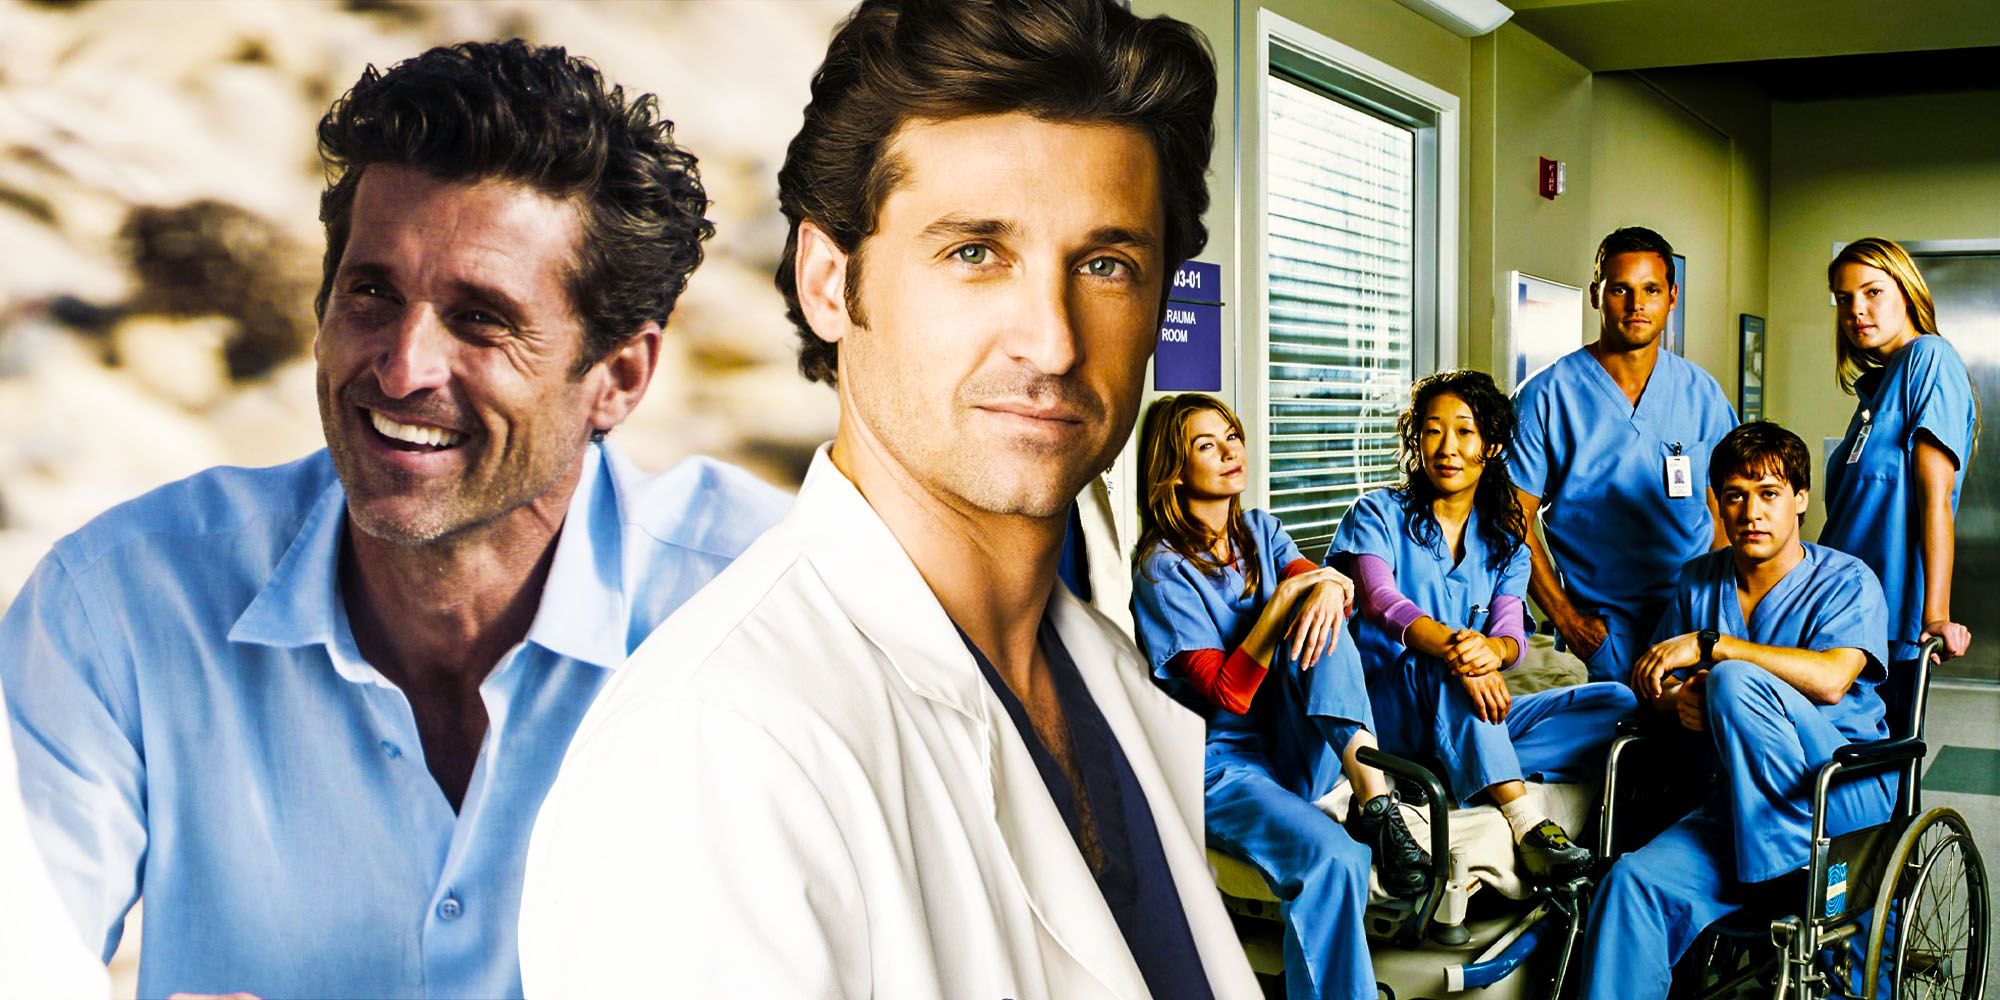 Greys Anatomy Patrick Dempsey Fallout Explained Allegations & Updates